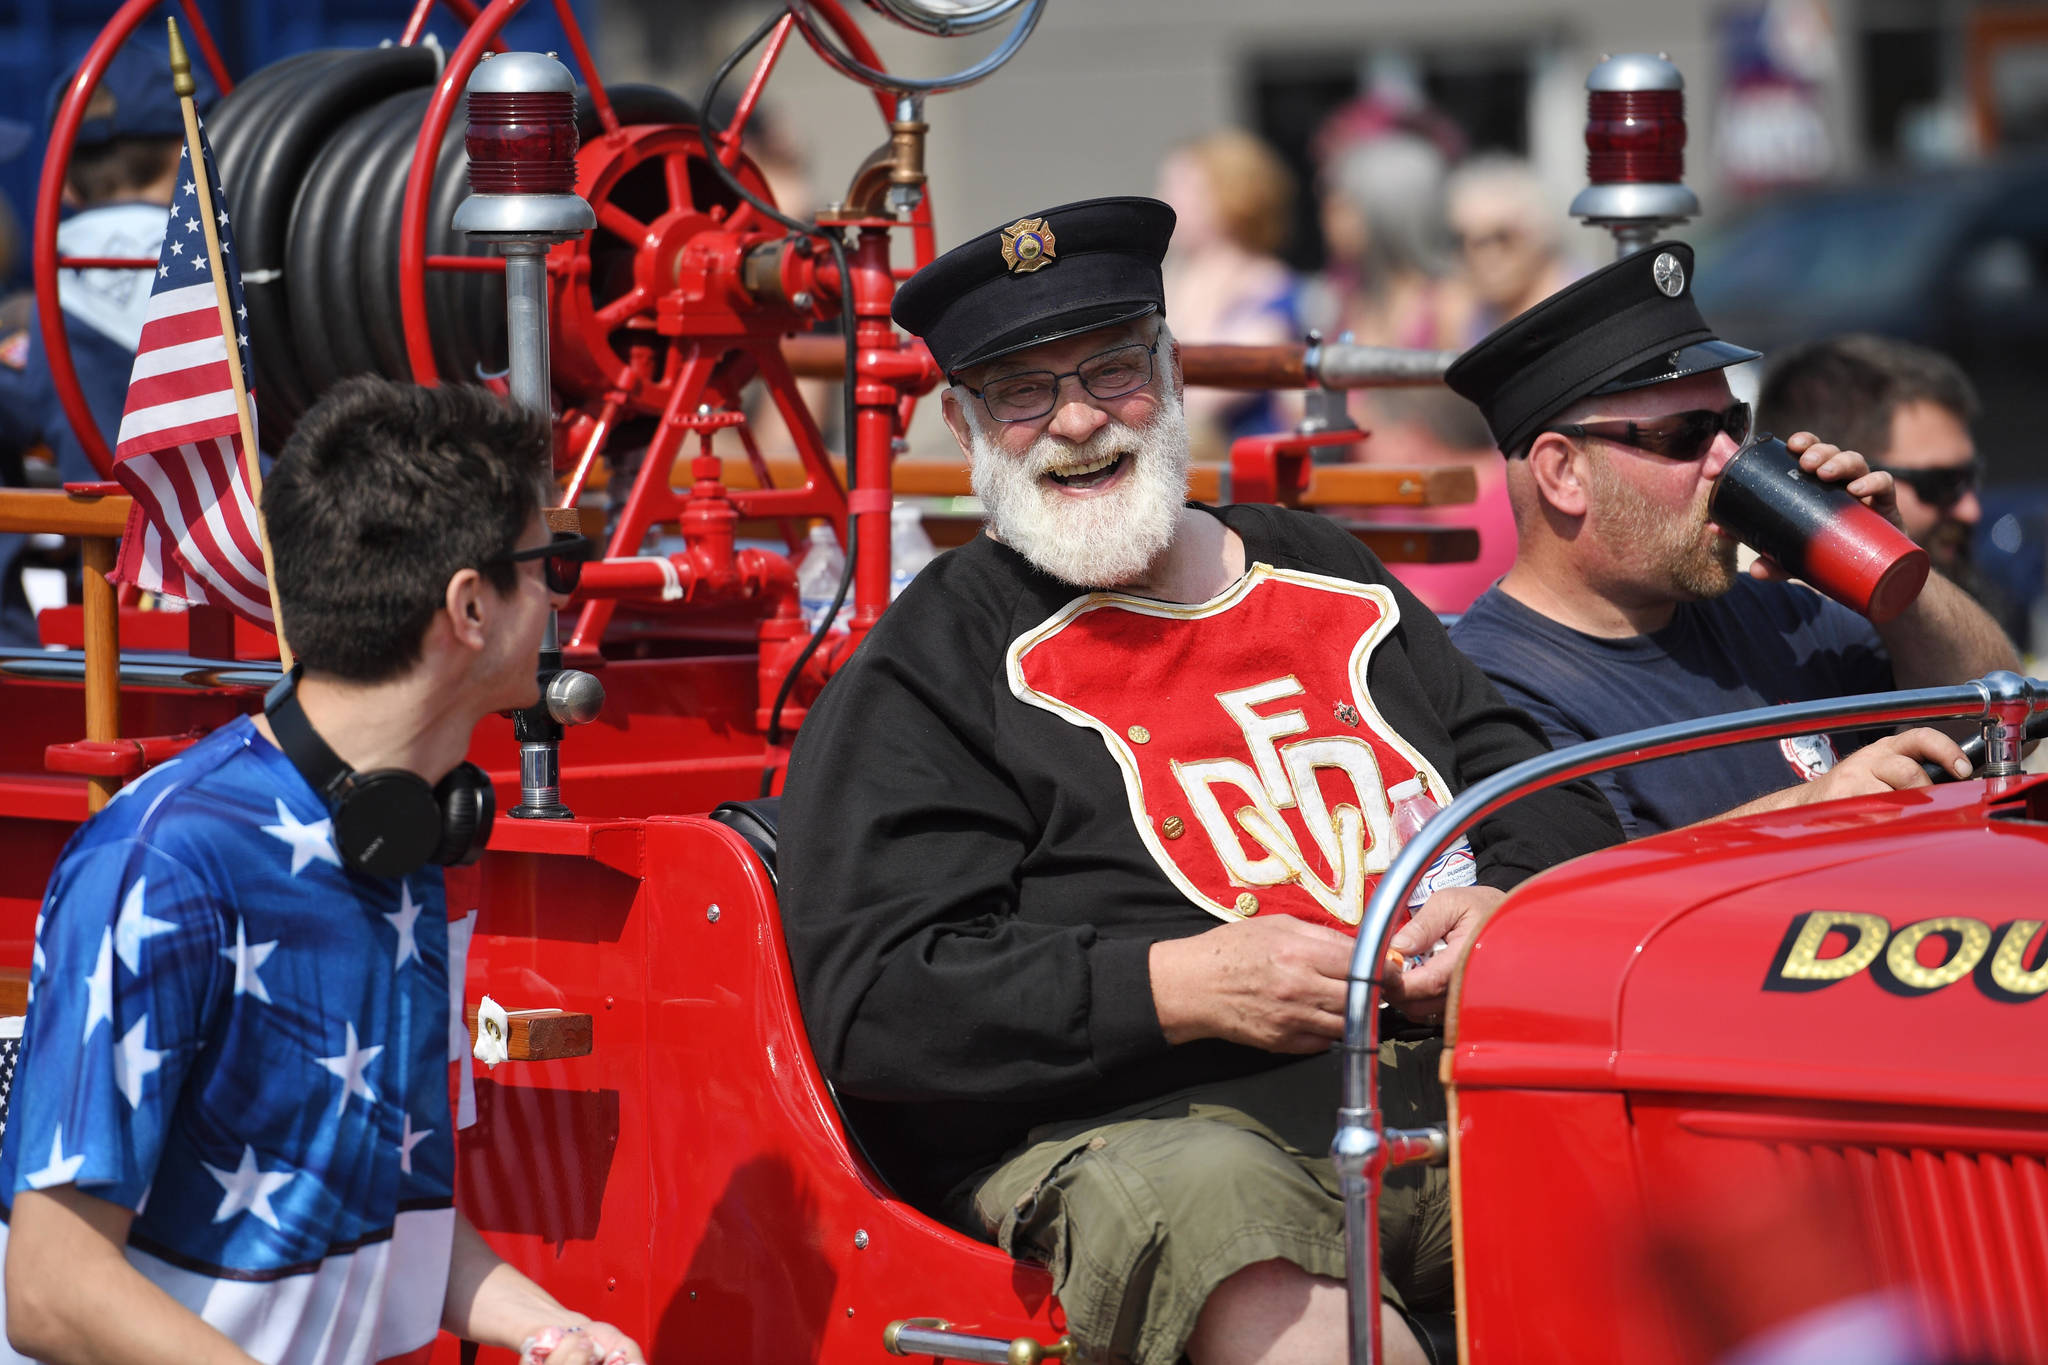 Mike Race, center, rides in Capital City Fire/Rescue’s 1937 Ford fire engine during the Fourth of July parade on Thursday, July 4, 2019. (Michael Penn | Juneau Empire)